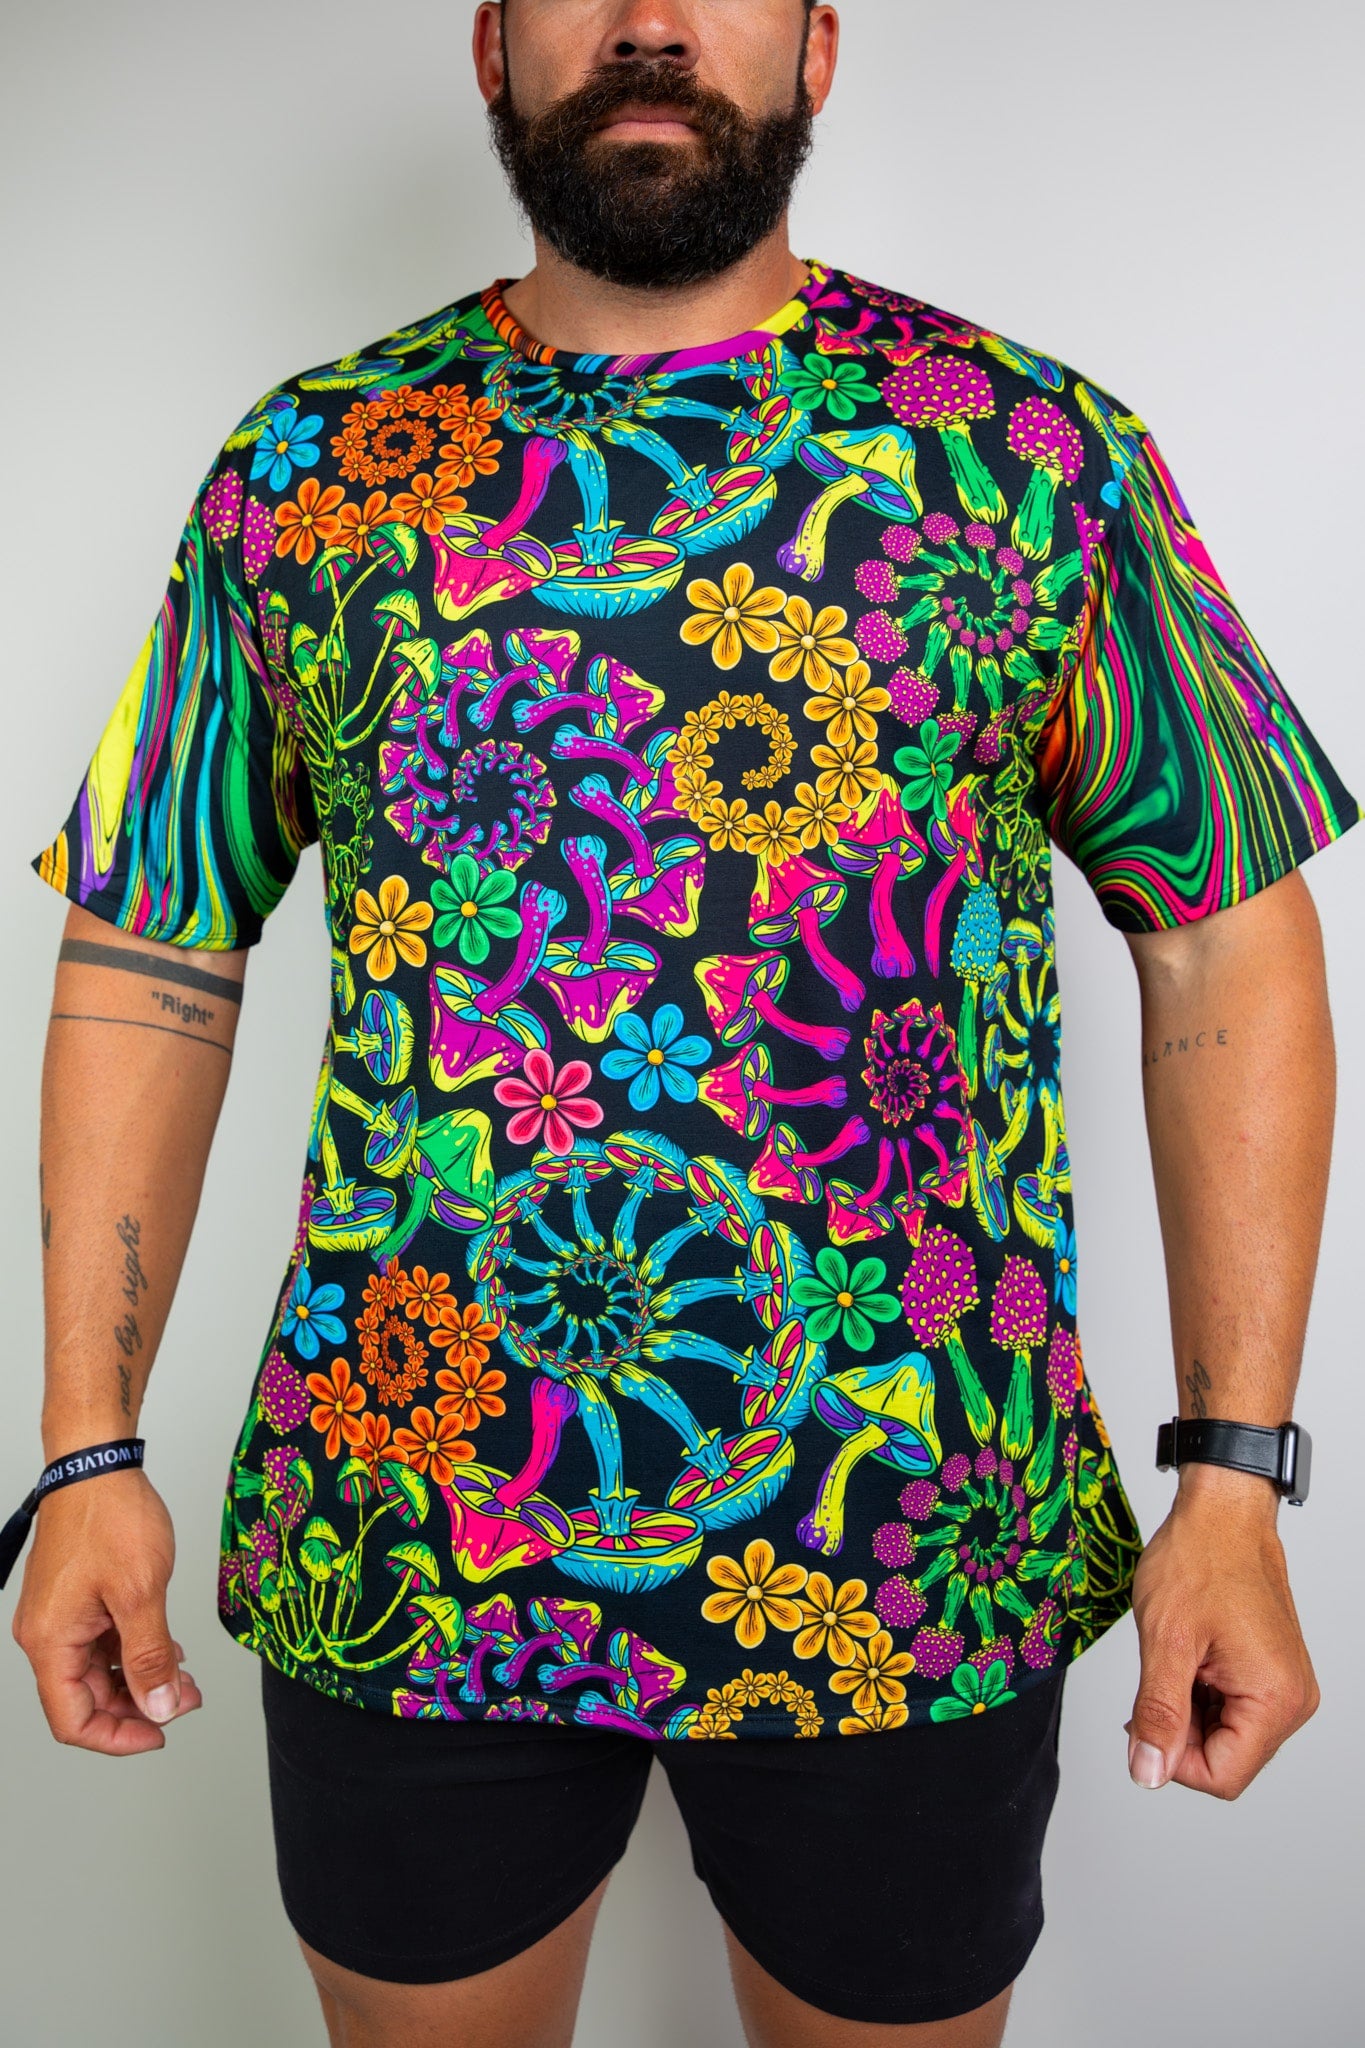  Model in a vibrant, psychedelic floral t-shirt with bold patterns, perfect for raves. Freedom Rave Wear offers unique festival fashion.